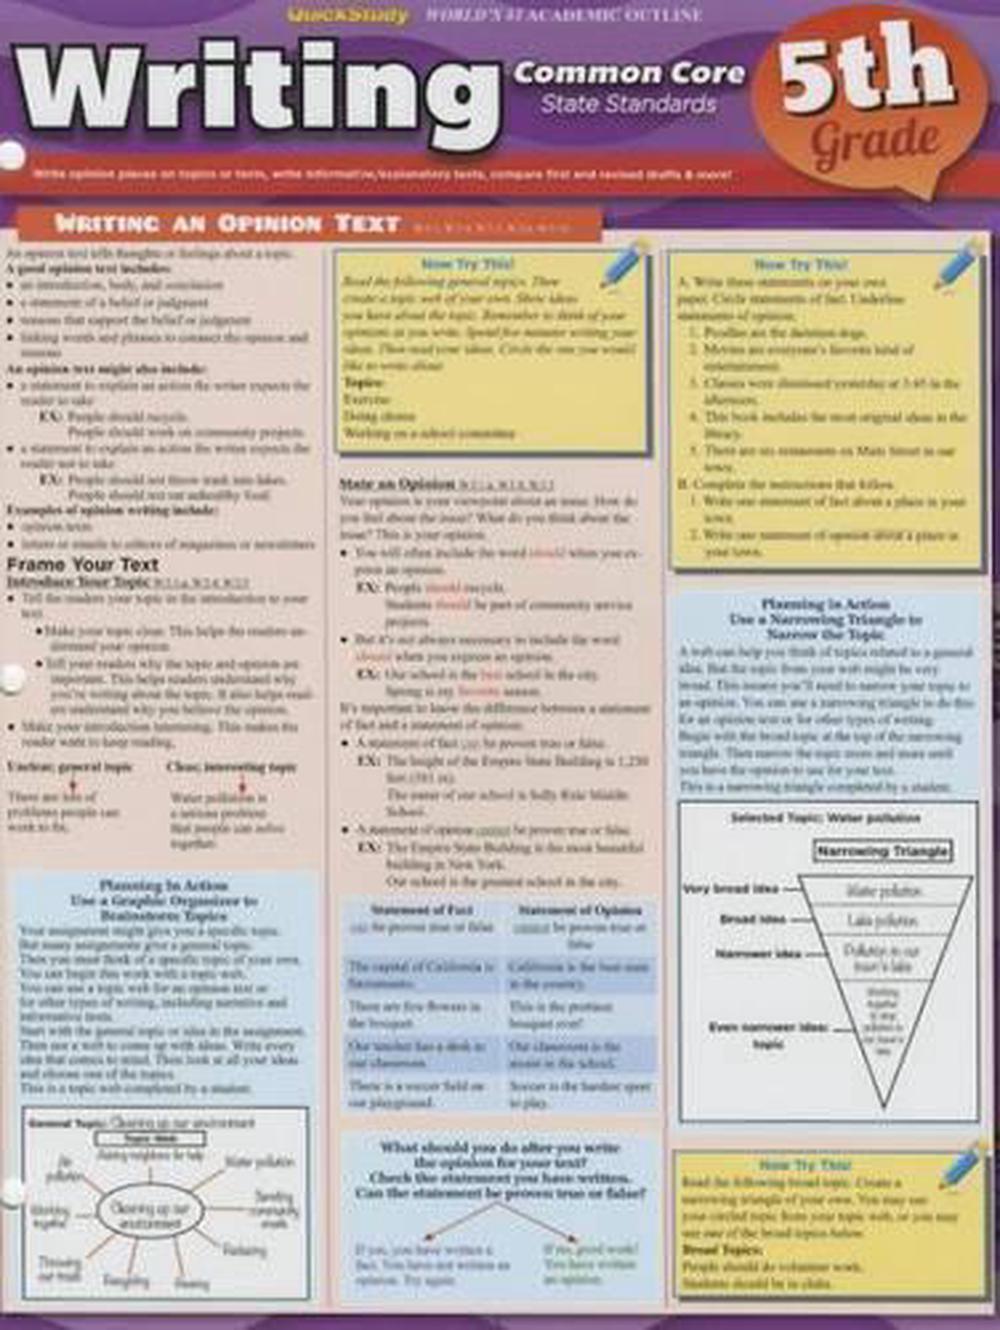 writing-common-core-5th-grade-by-barcharts-inc-9781423223740-buy-online-at-the-nile